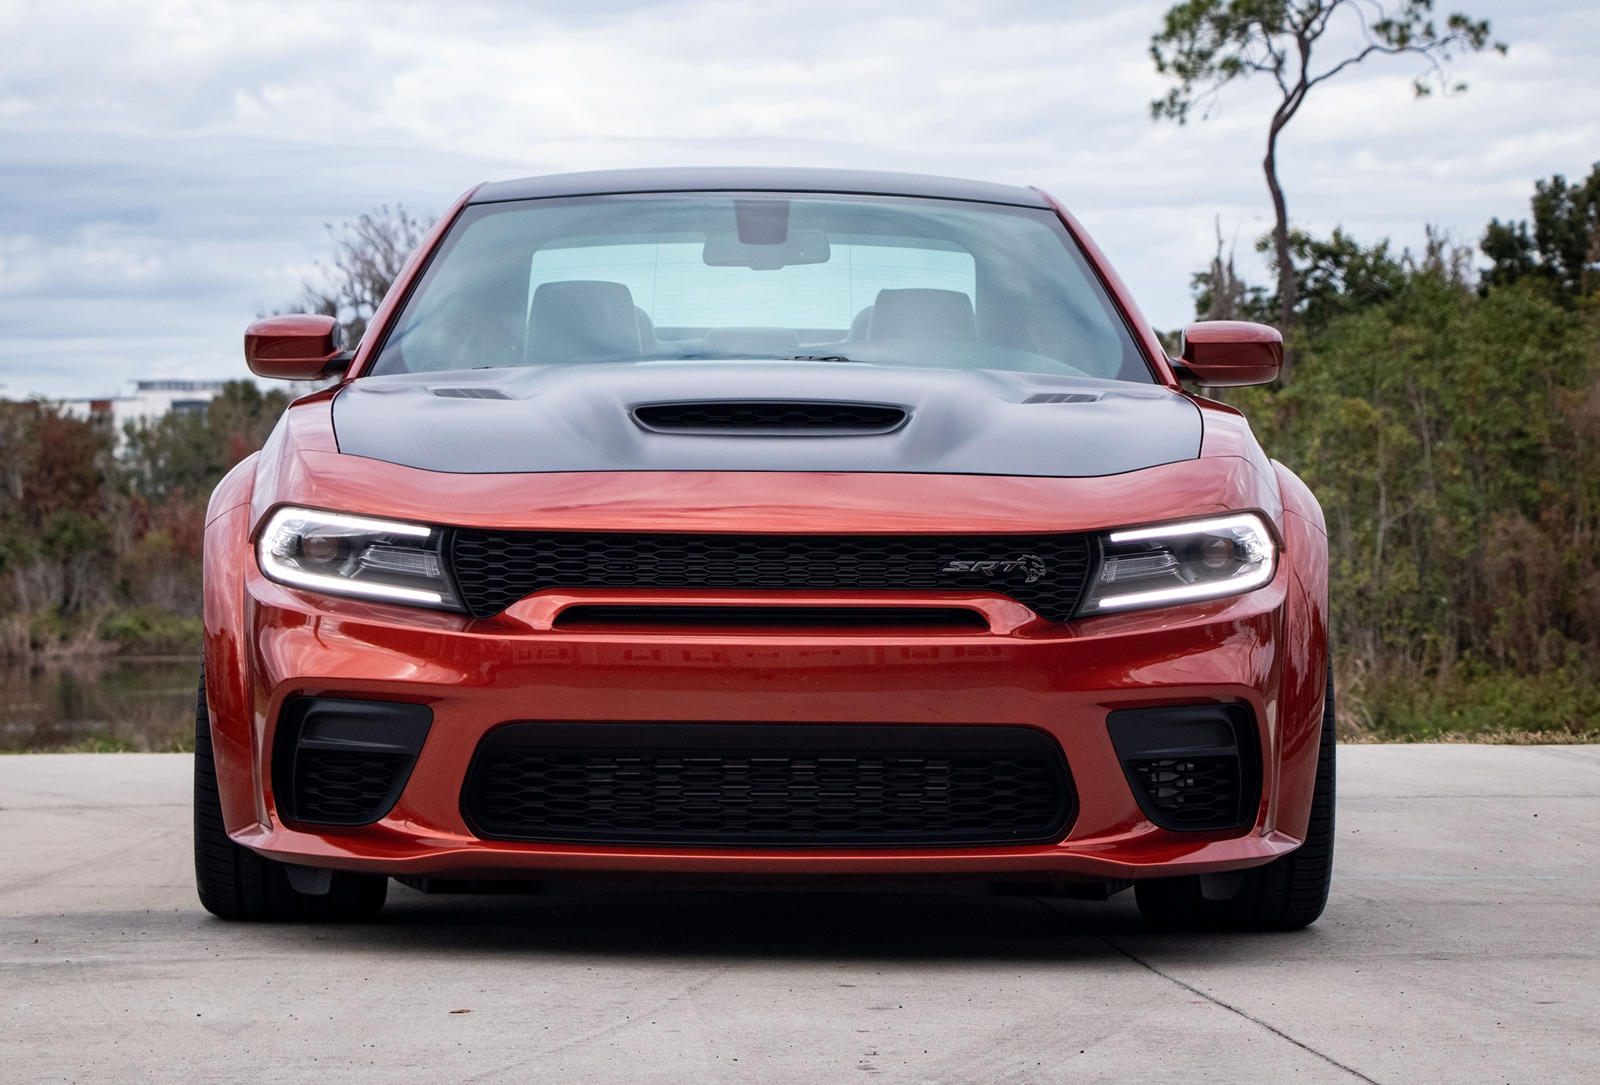 2021 Dodge Charger SRT Hellcat Front View